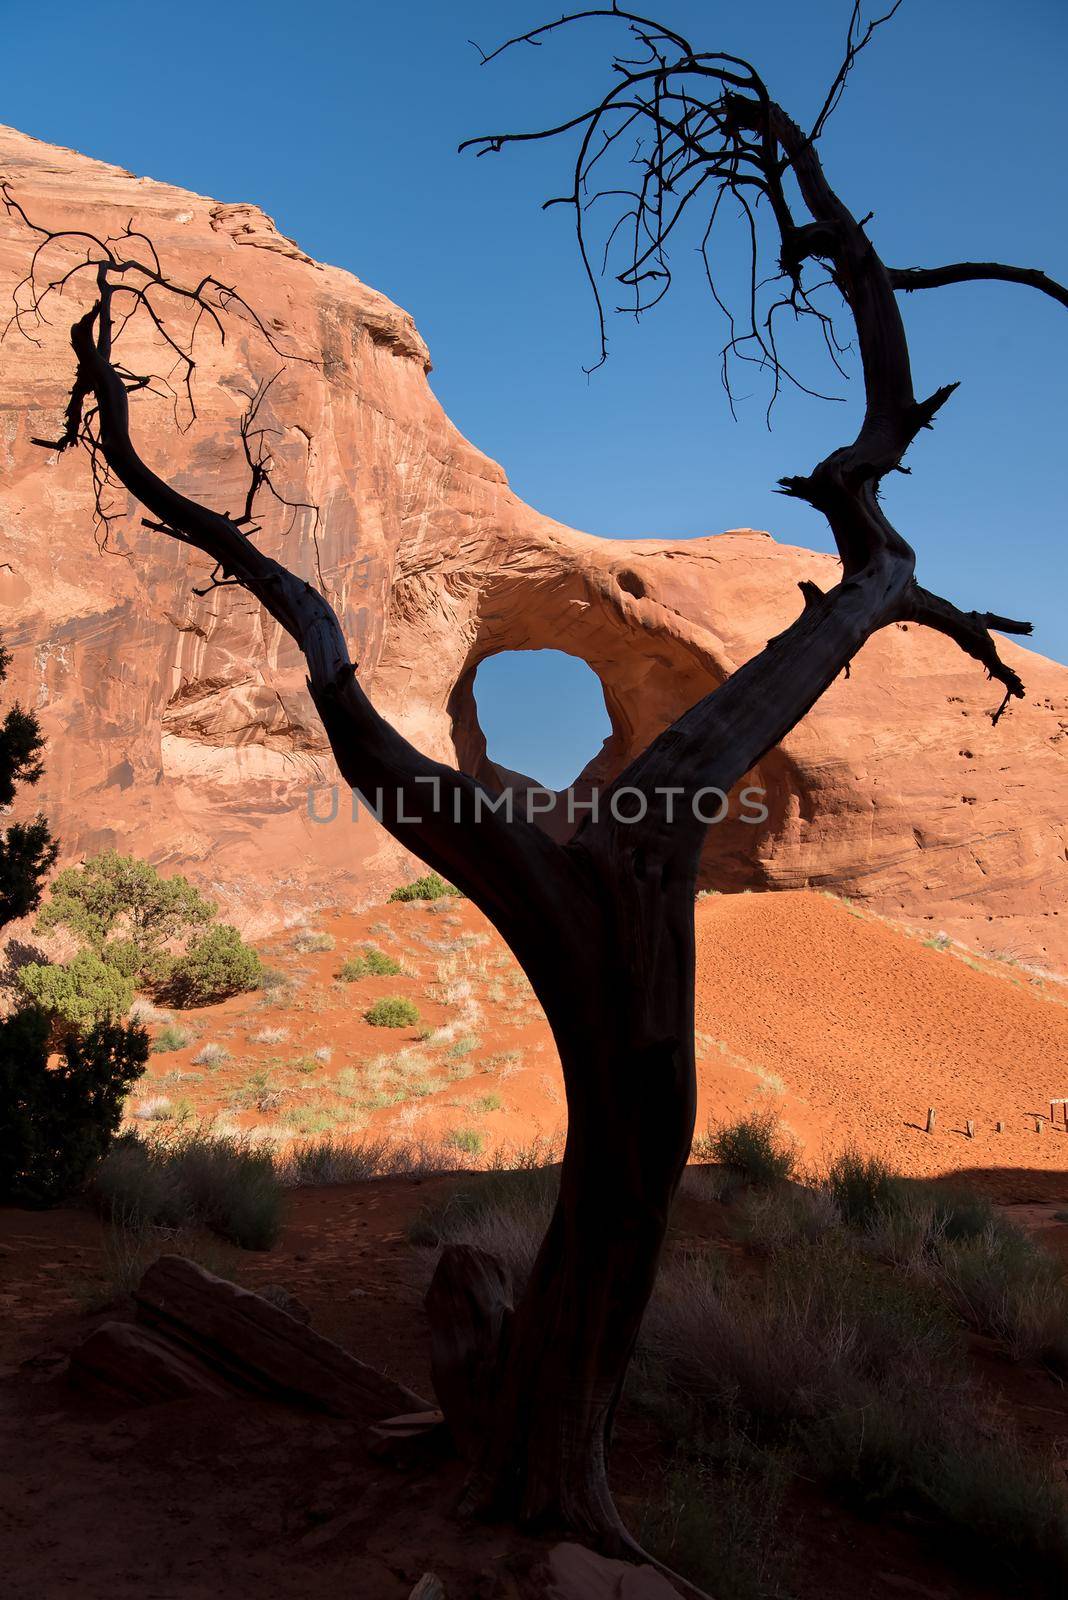 Ear-of-the-Wind Utah arch giant sized hole in rock face at by jyurinko